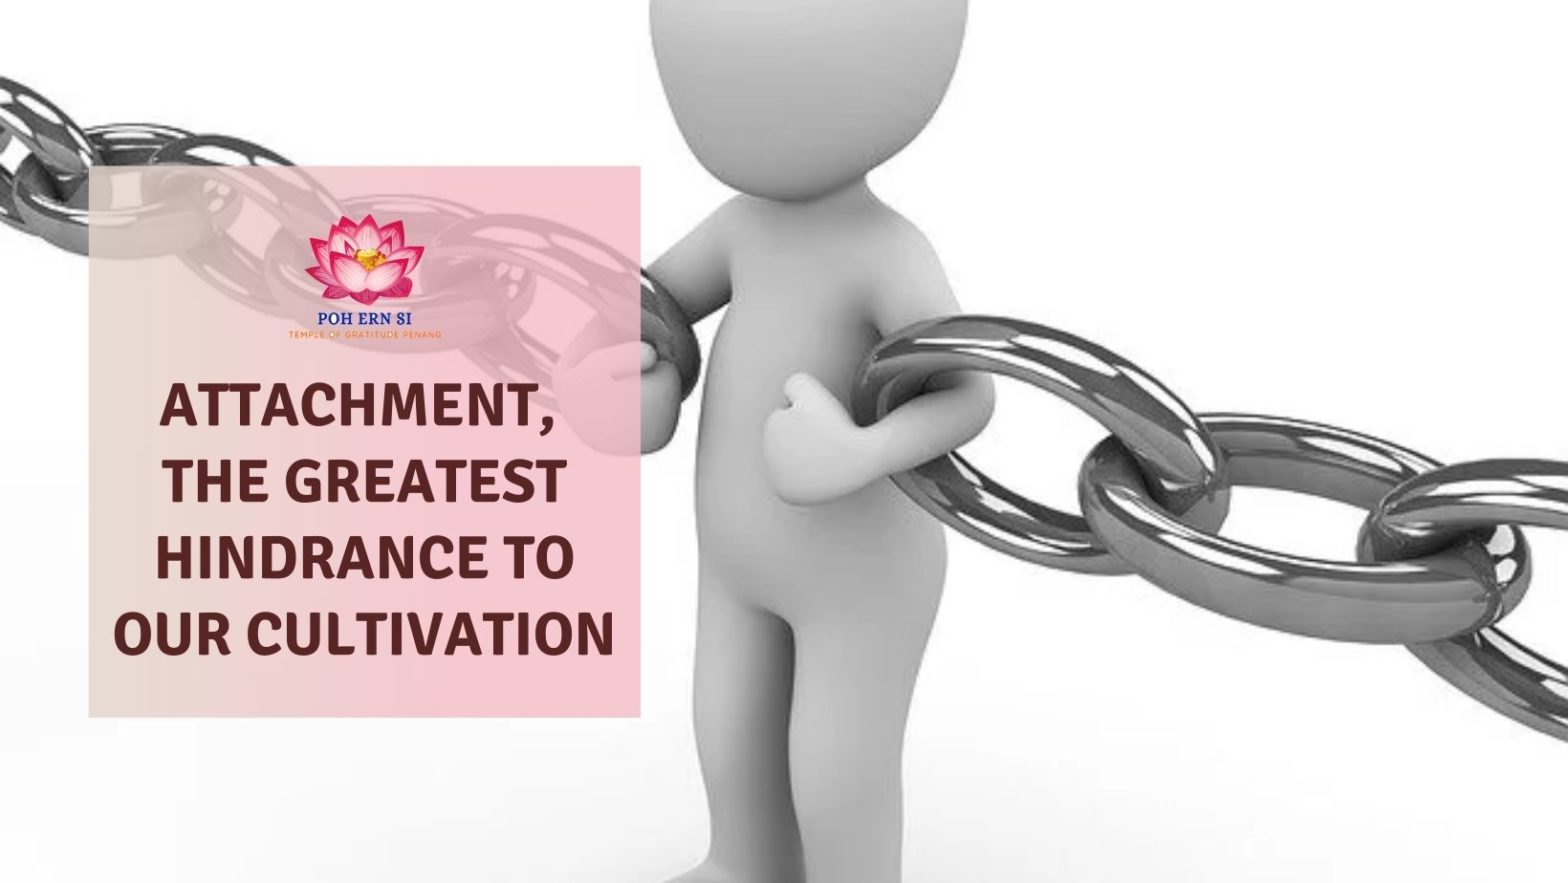 what is attachment - Poh Ern Si's blog